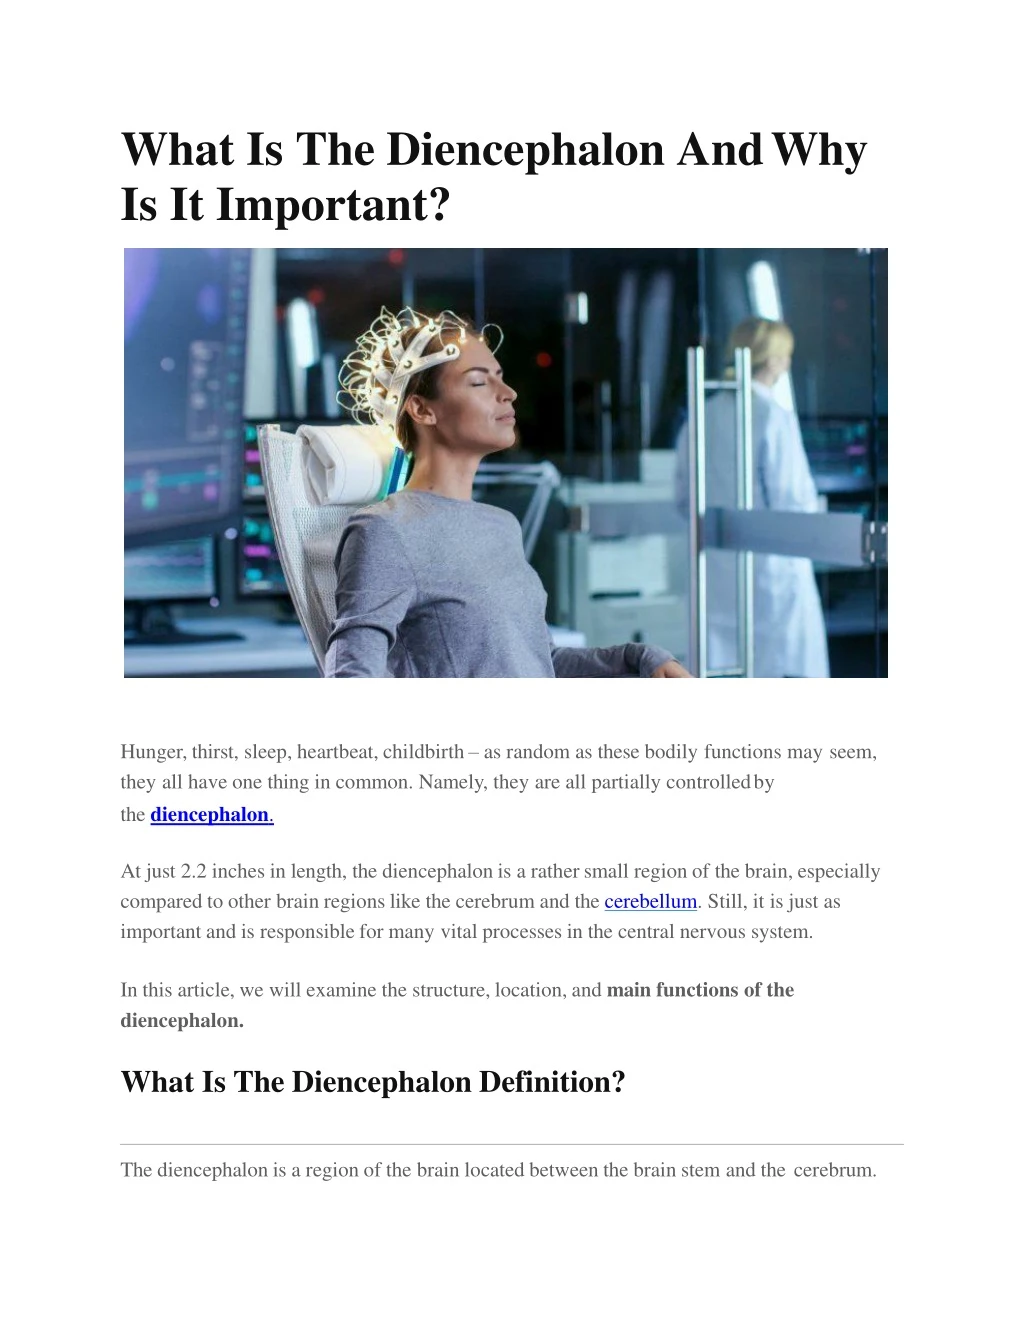 what is the diencephalon and why is it important